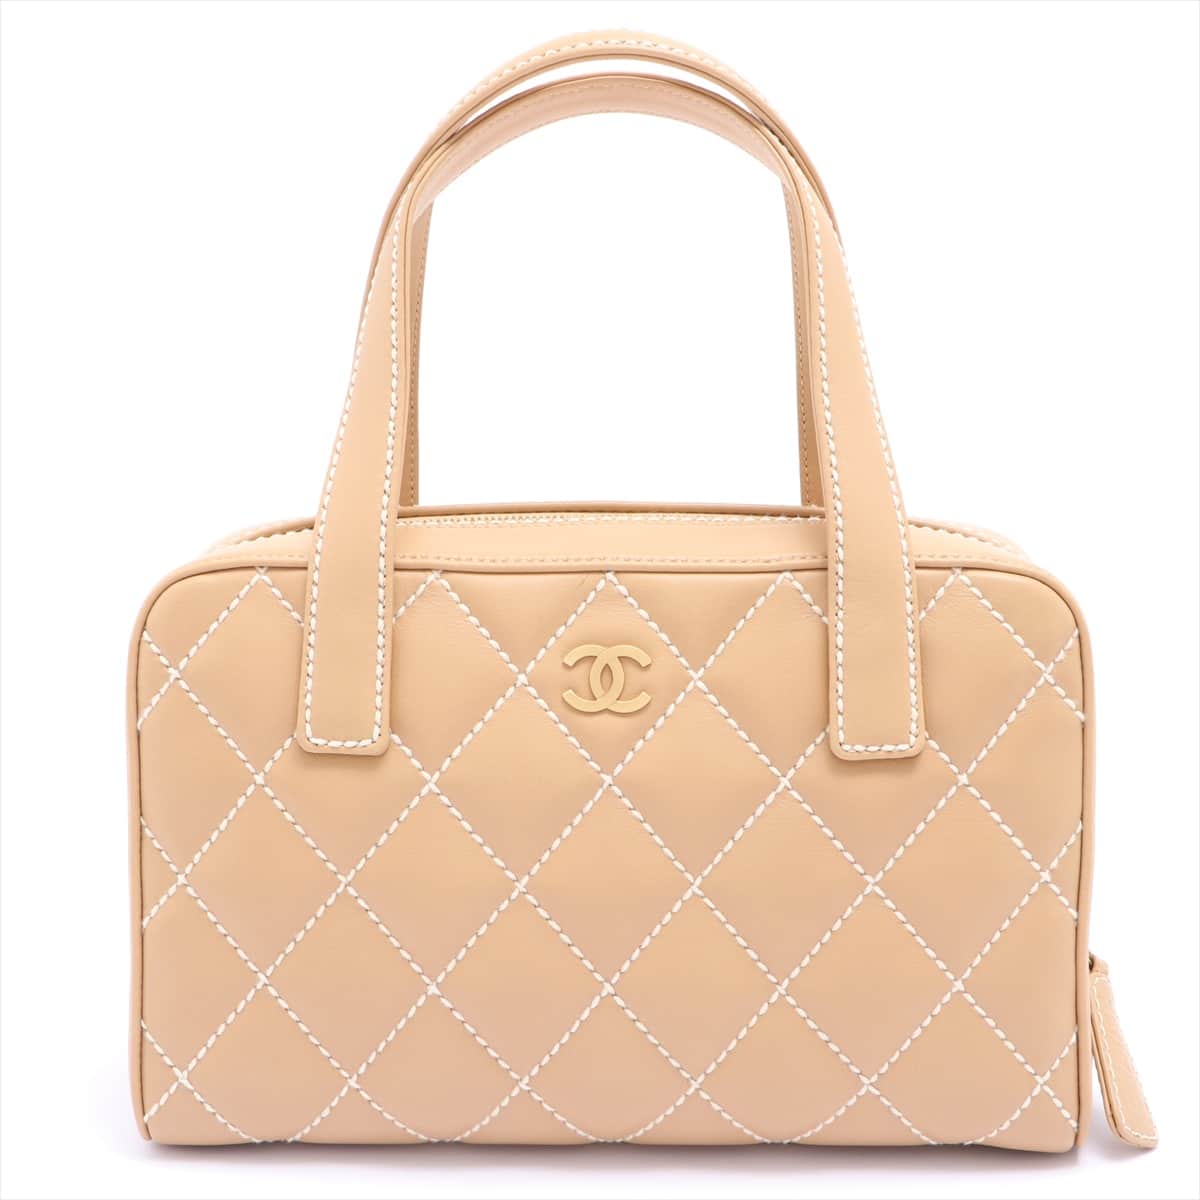 Chanel Wild Stitch Leather Hand bag Beige Gold Metal fittings with pouch